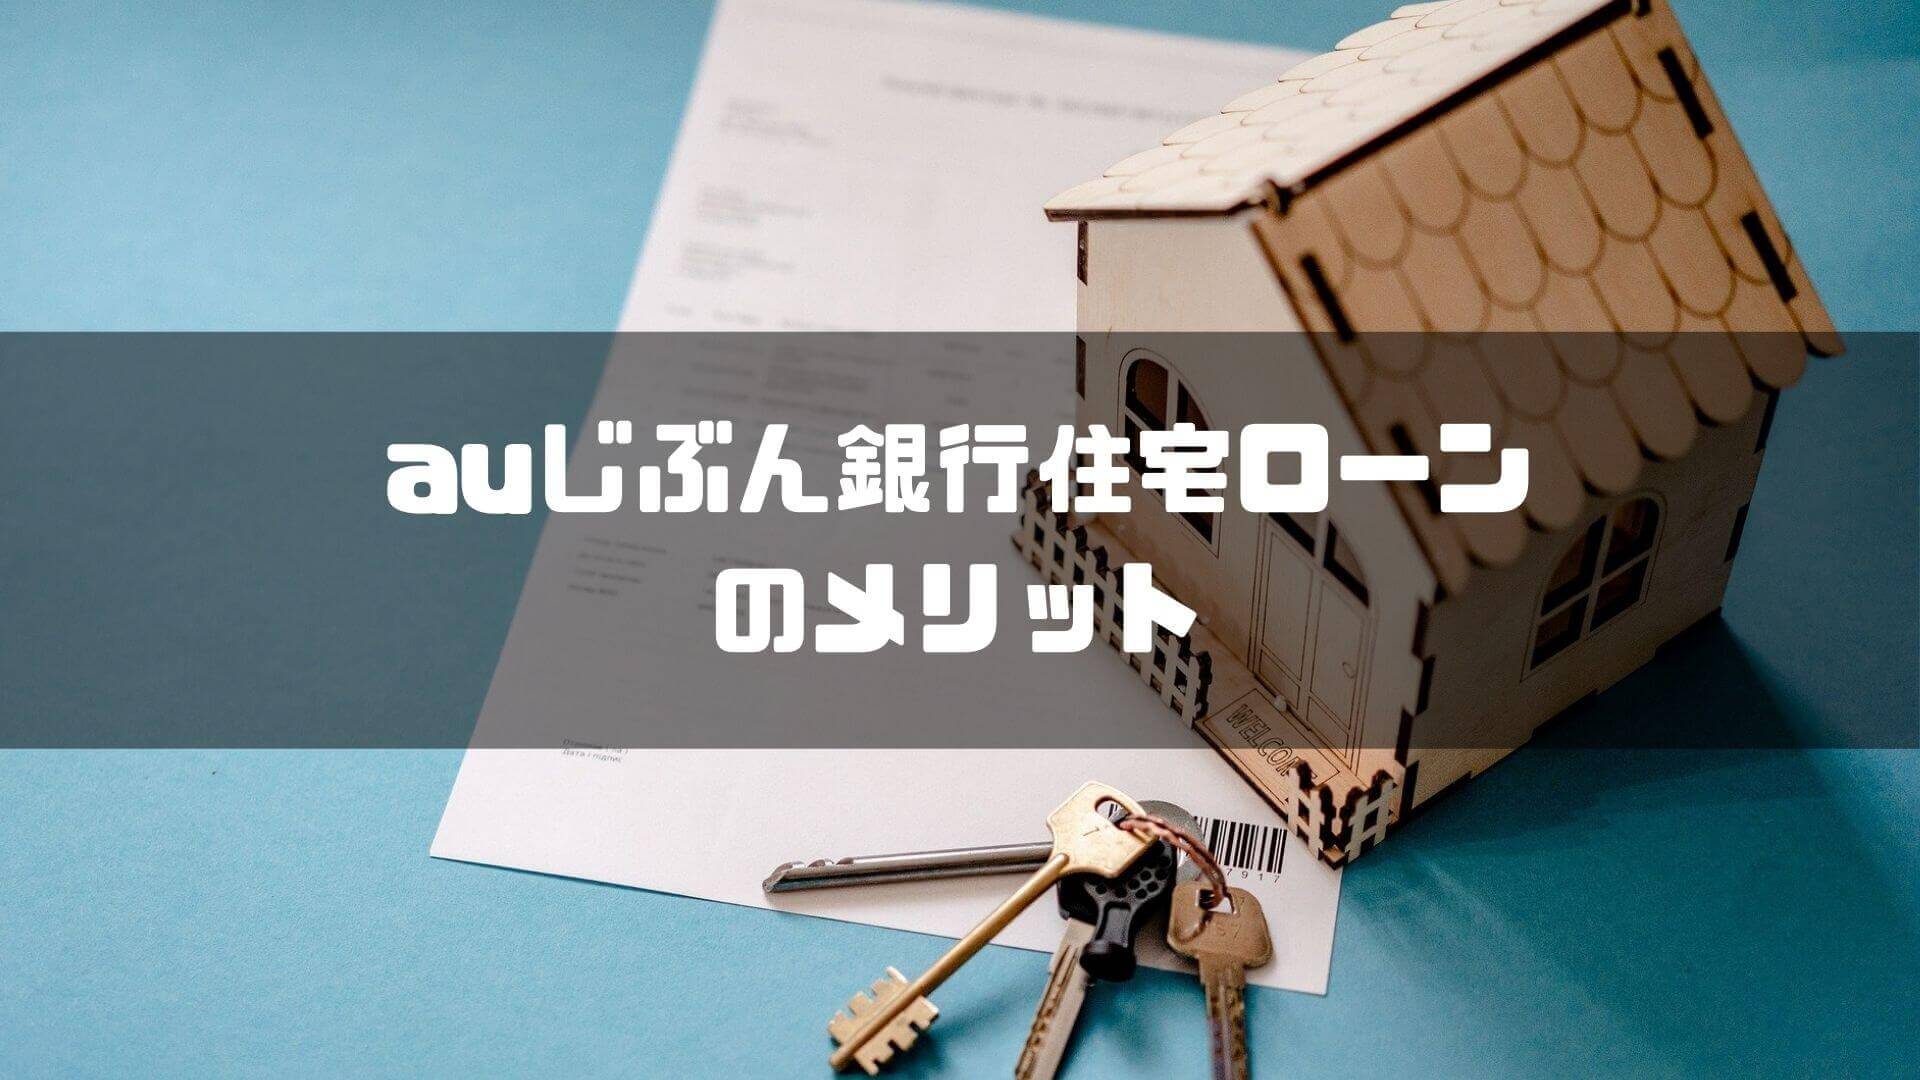 auじぶん銀行_住宅ローン_口コミ_メリット